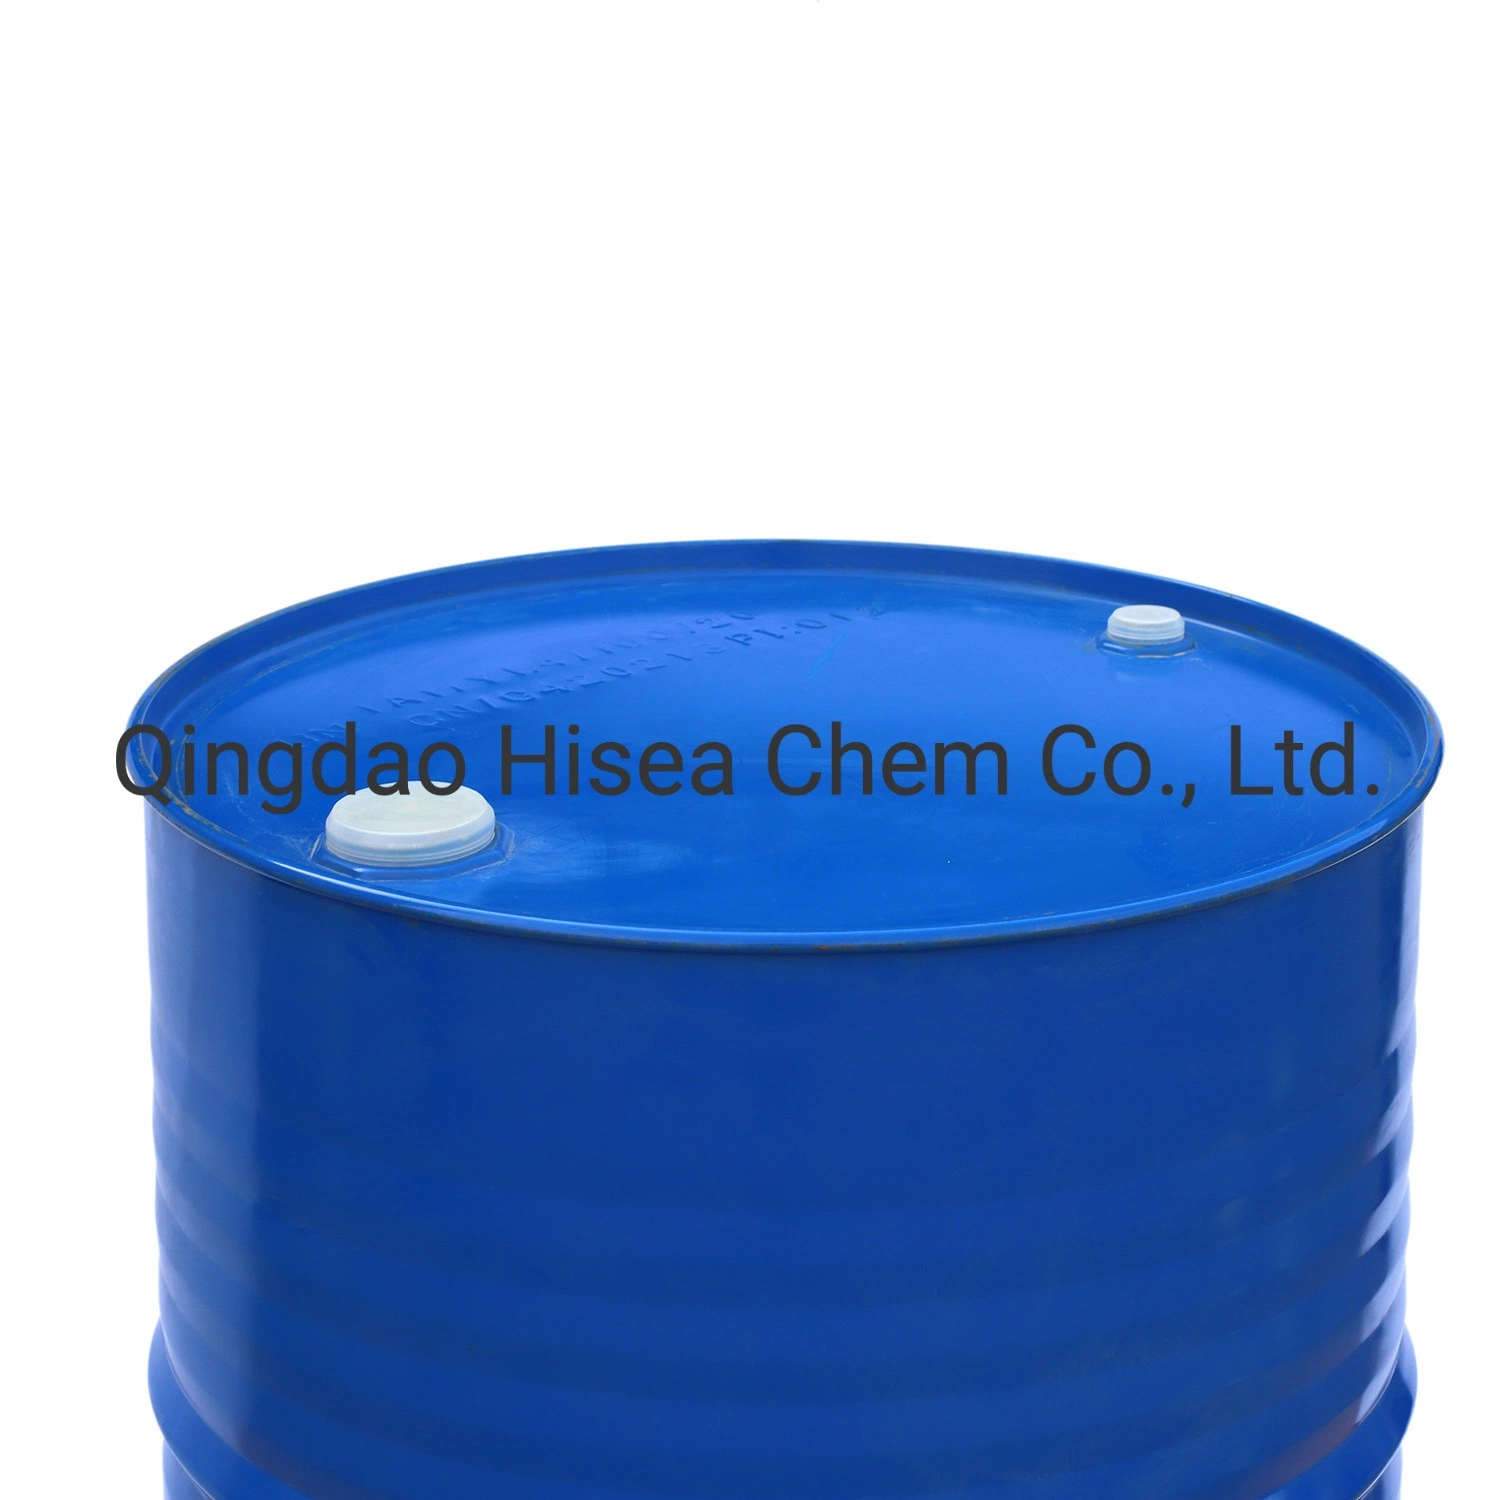 High Quality of Ethyl Acetate 99% Min Industrial Grade CAS#141-78-6